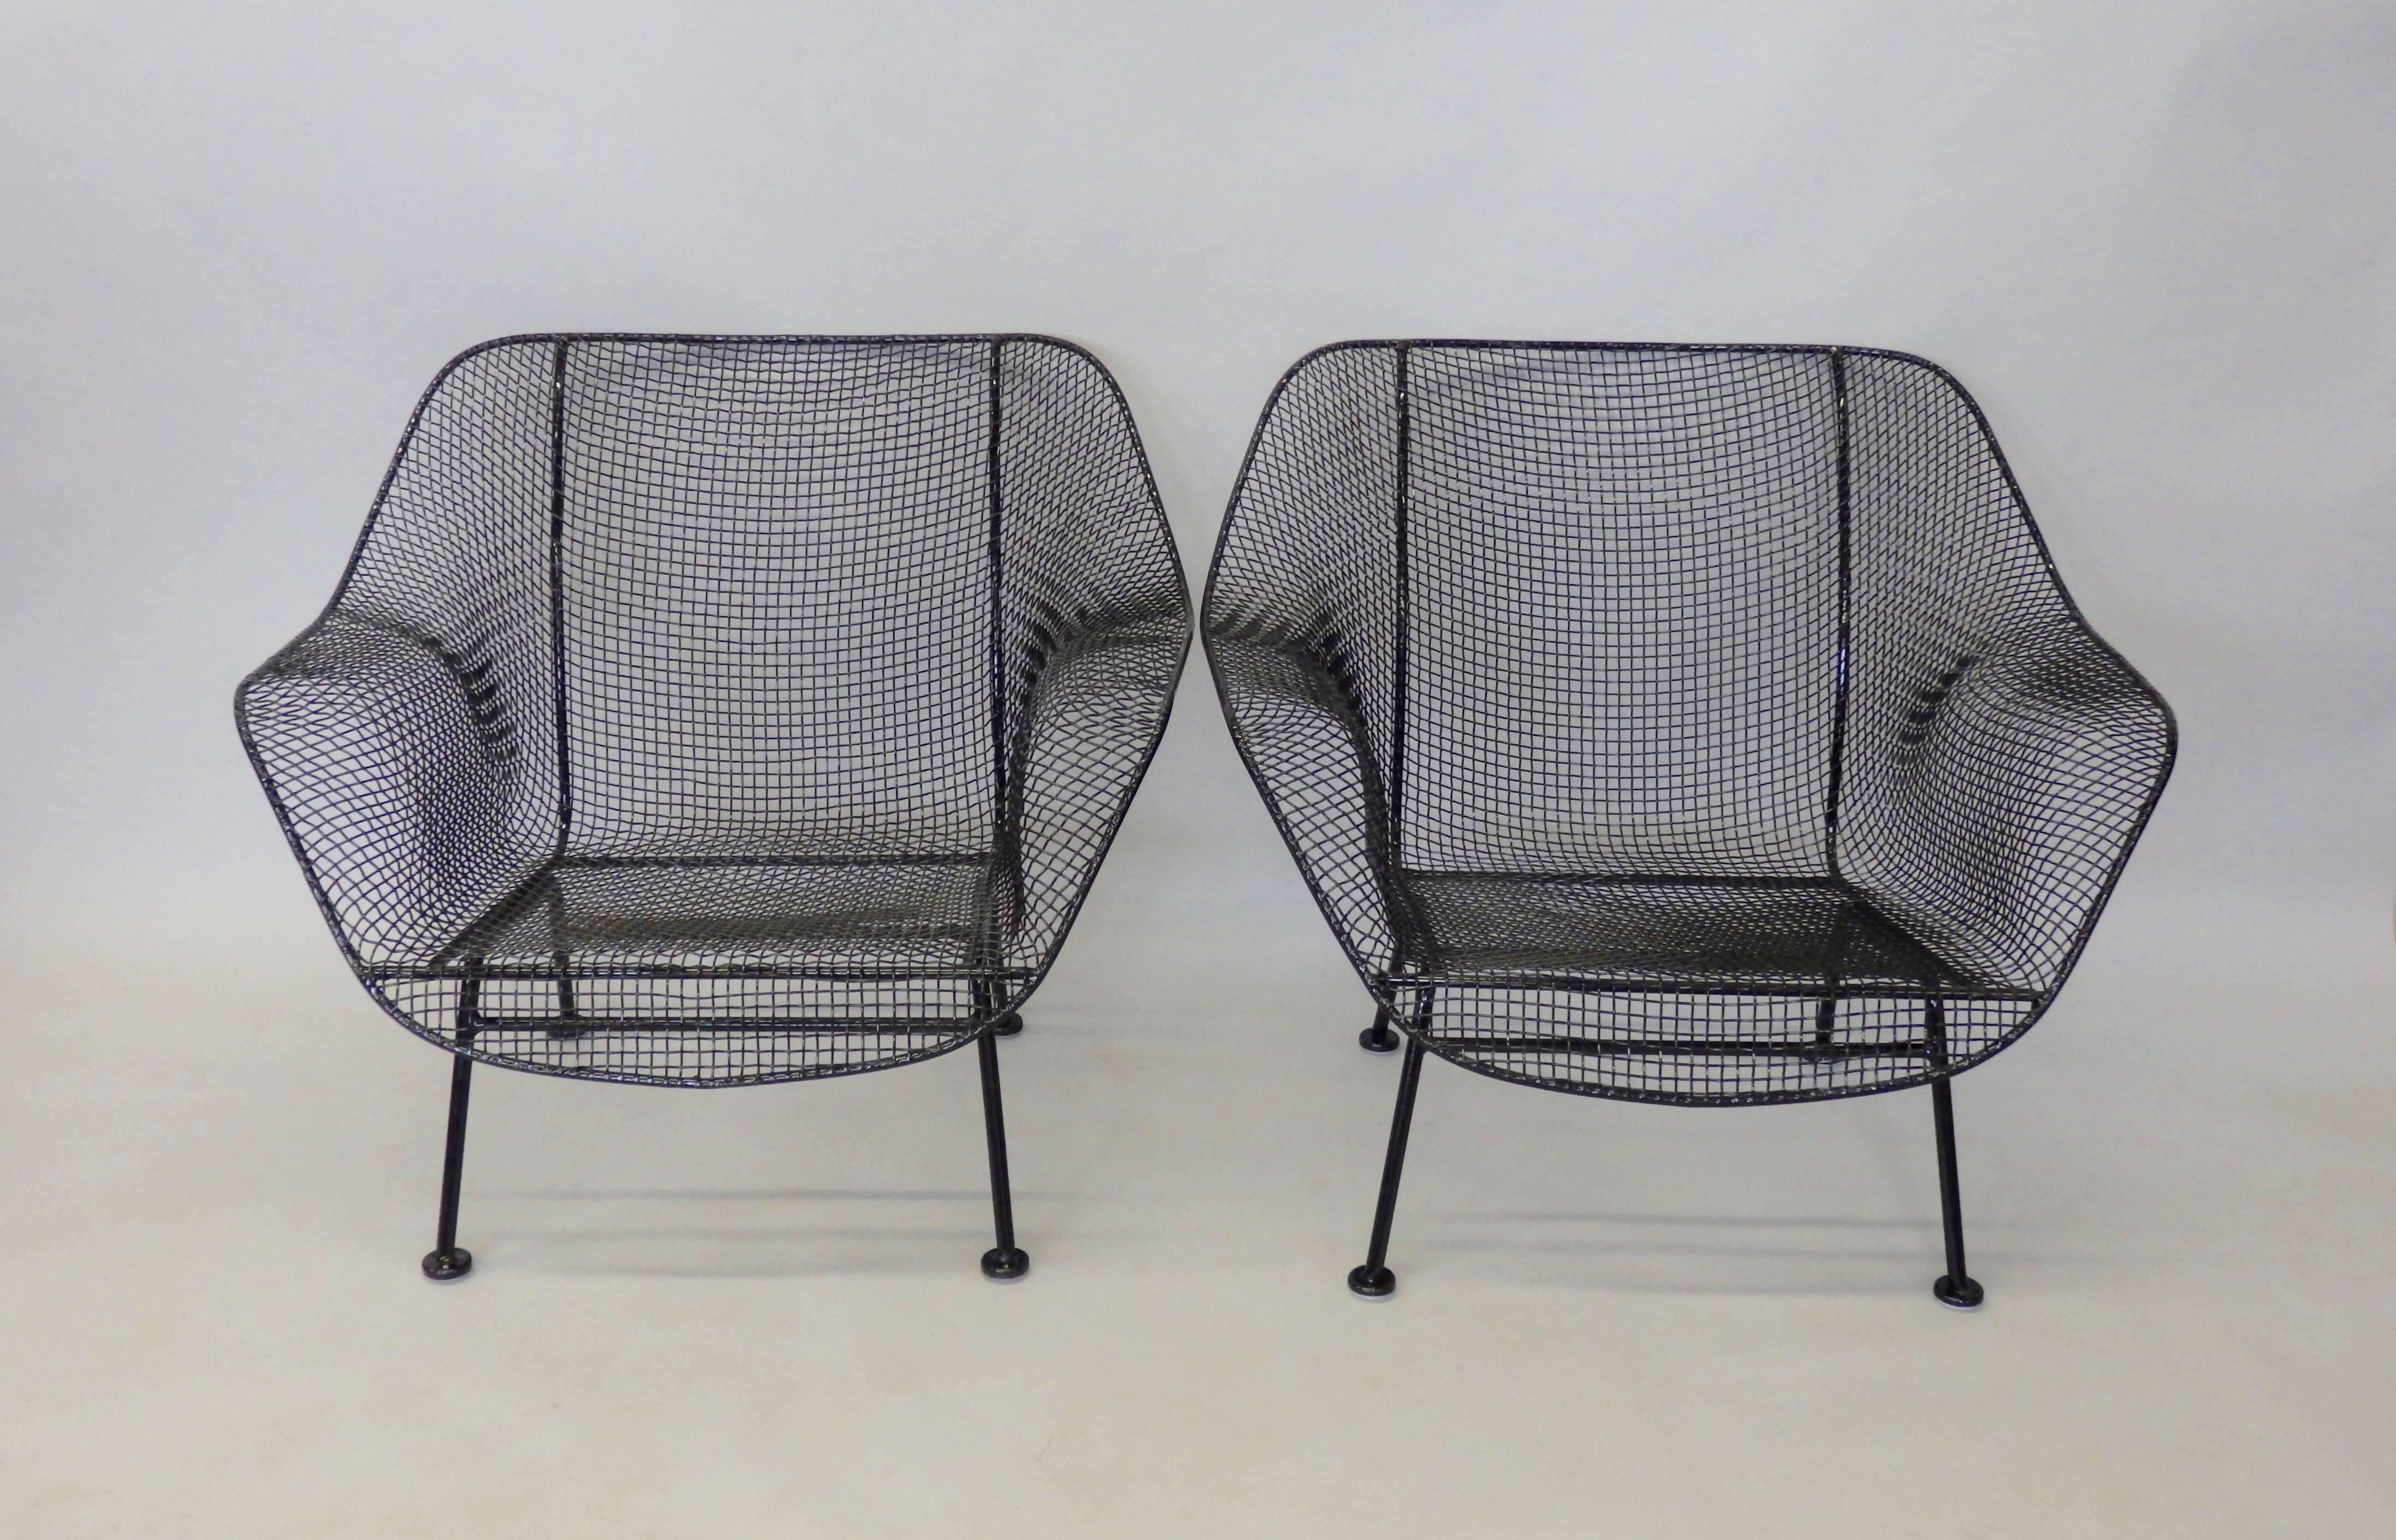 Powder-Coated Nicely Restored Russell Woodard Wrought Iron with Steel Mesh Lounge Chairs